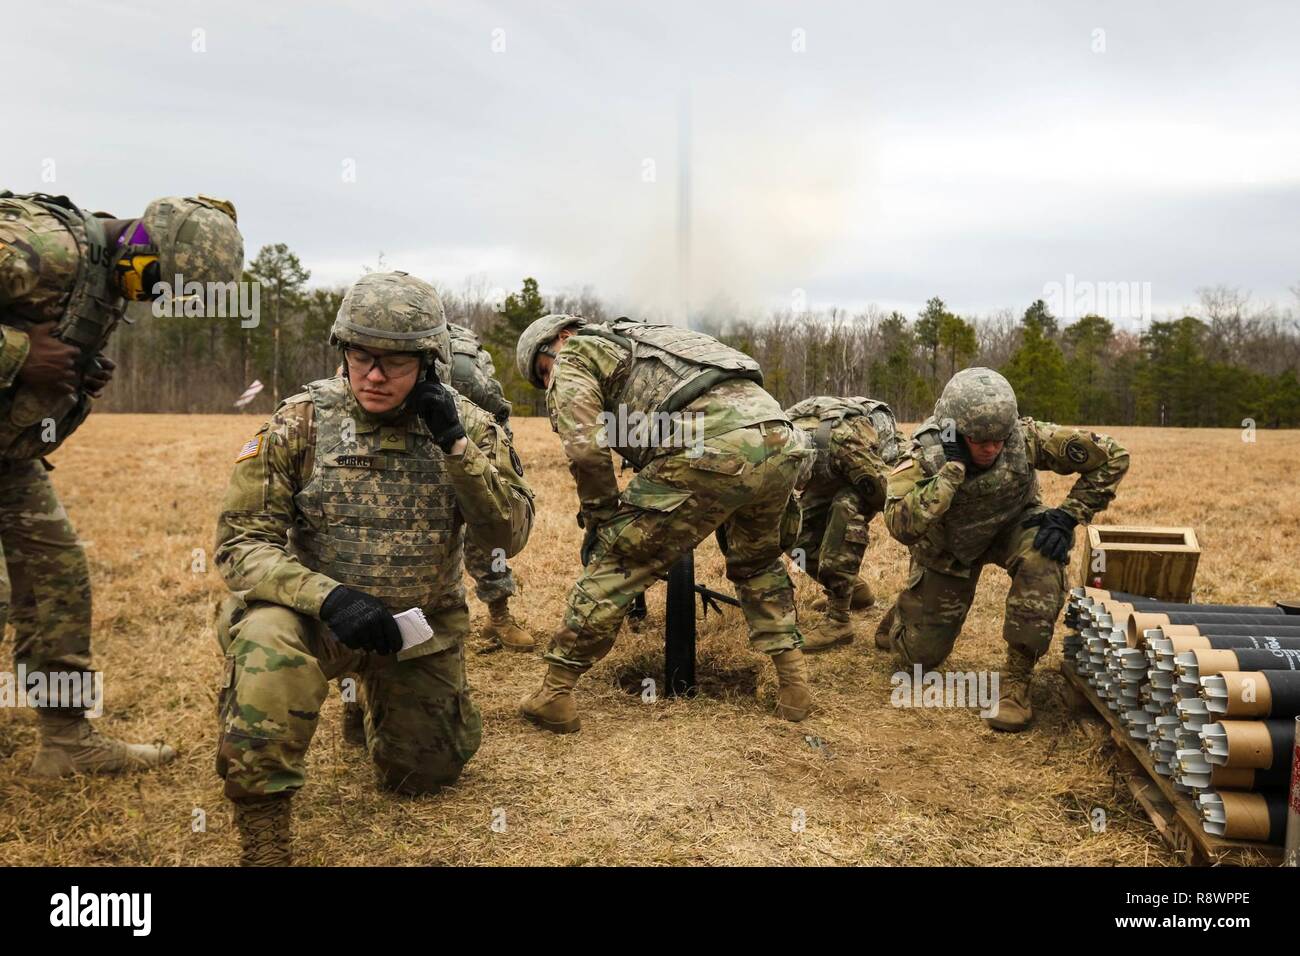 https://c8.alamy.com/comp/R8WPPE/soldiers-assigned-to-1st-battalion-3rd-us-infantry-regiment-the-old-guard-fires-an-81mm-round-from-an-m252-81mm-mortar-system-for-effective-fire-during-a-live-fire-training-exercise-in-support-1st-attack-reconnaissance-battalion-82nd-combat-aviation-brigade-at-fort-ap-hill-va-march-13-R8WPPE.jpg